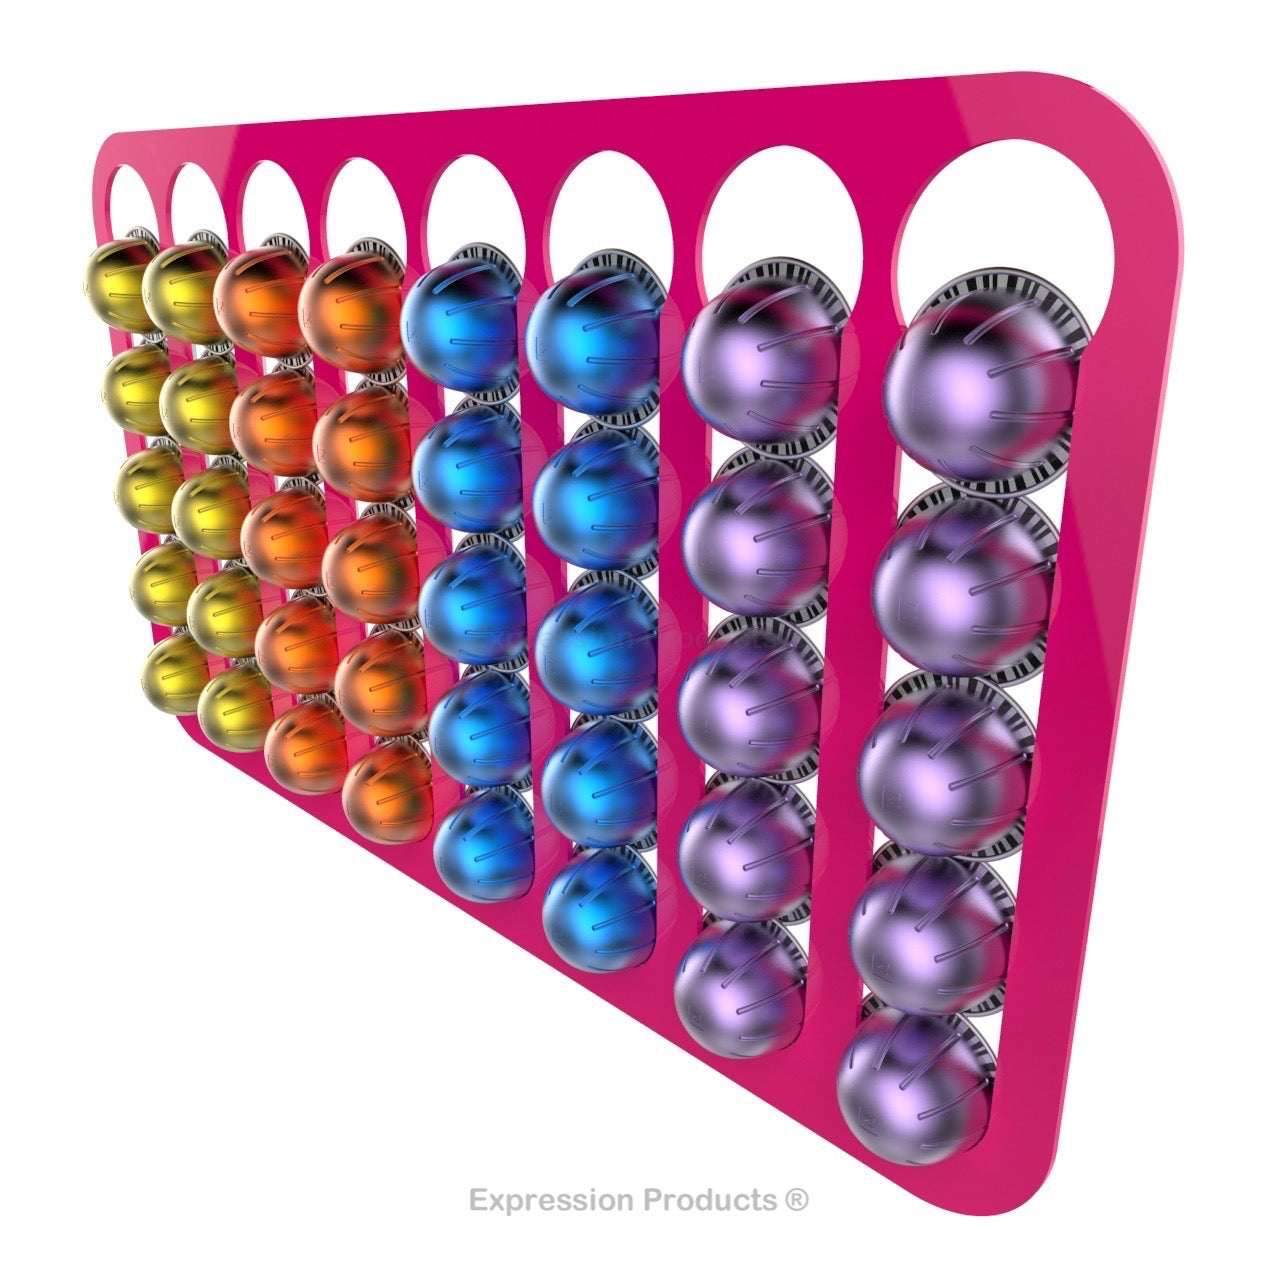 Magnetic Nespresso Vertuo capsule holder shown in pink holding 40 pods